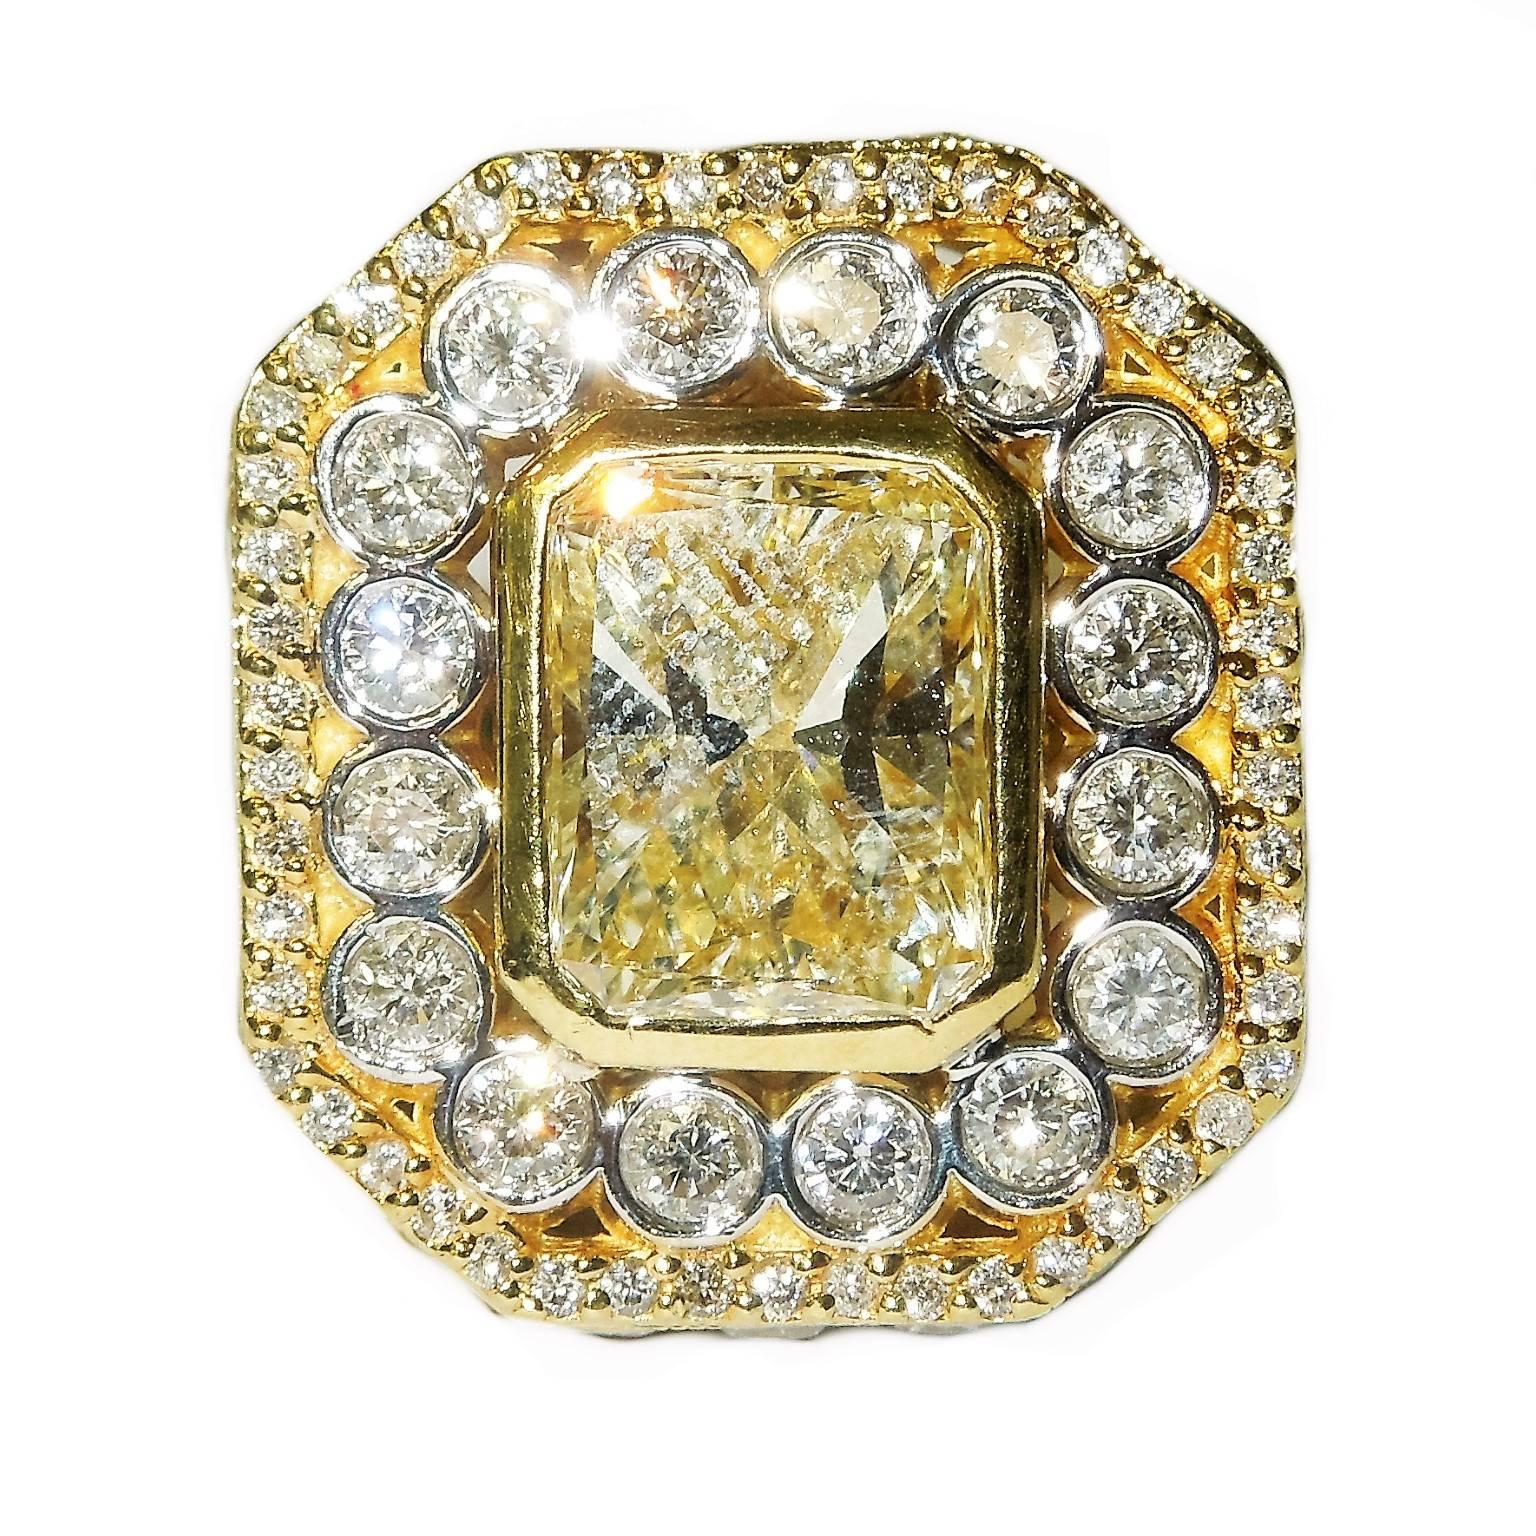 18K Gold Ring with 5.01 ct. Natural Light Yellow Radiant Diamond Fancy Yellow

5.01 ct Radiant shape diamond VS2 clarity. 
Dimensions of stone: 11.33mm X 8.96mm X 5.91mm

Rest of the the ring has 3.53 ct. G Color, VS Quality Diamonds

Total